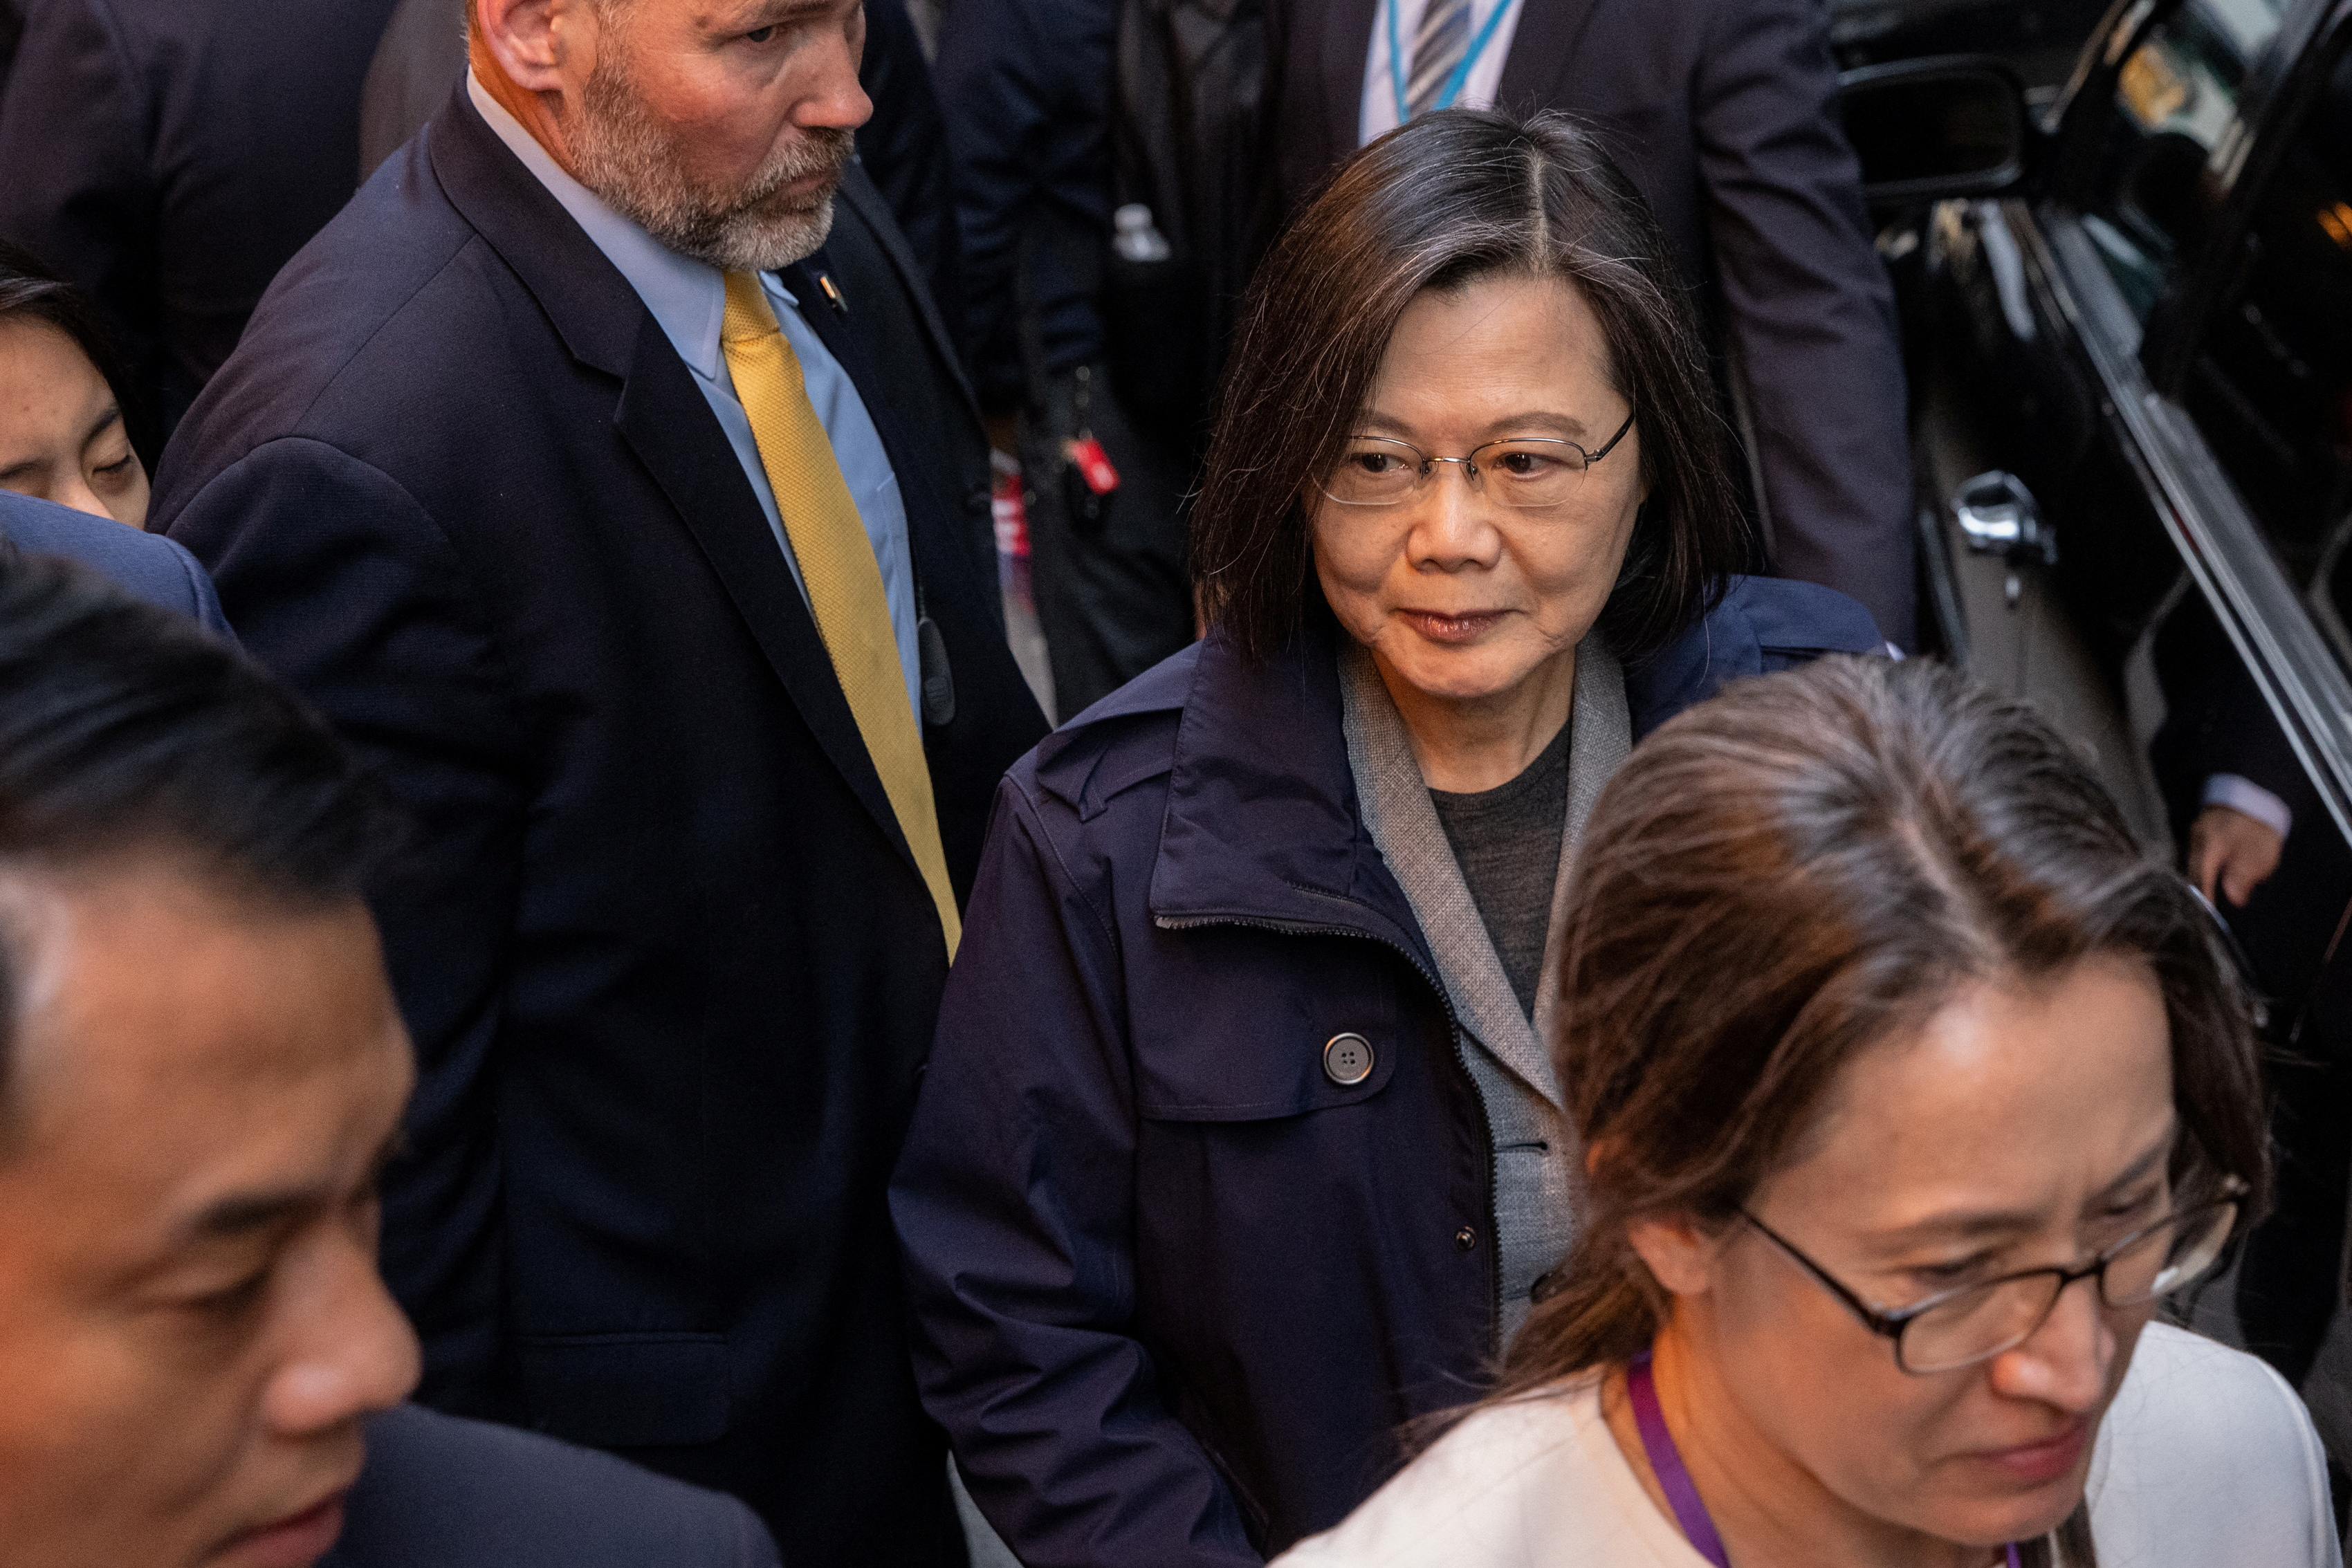 Taiwan's President Tsai Ing-wen departs at the Lotte Hotel in Manhattan in New York City